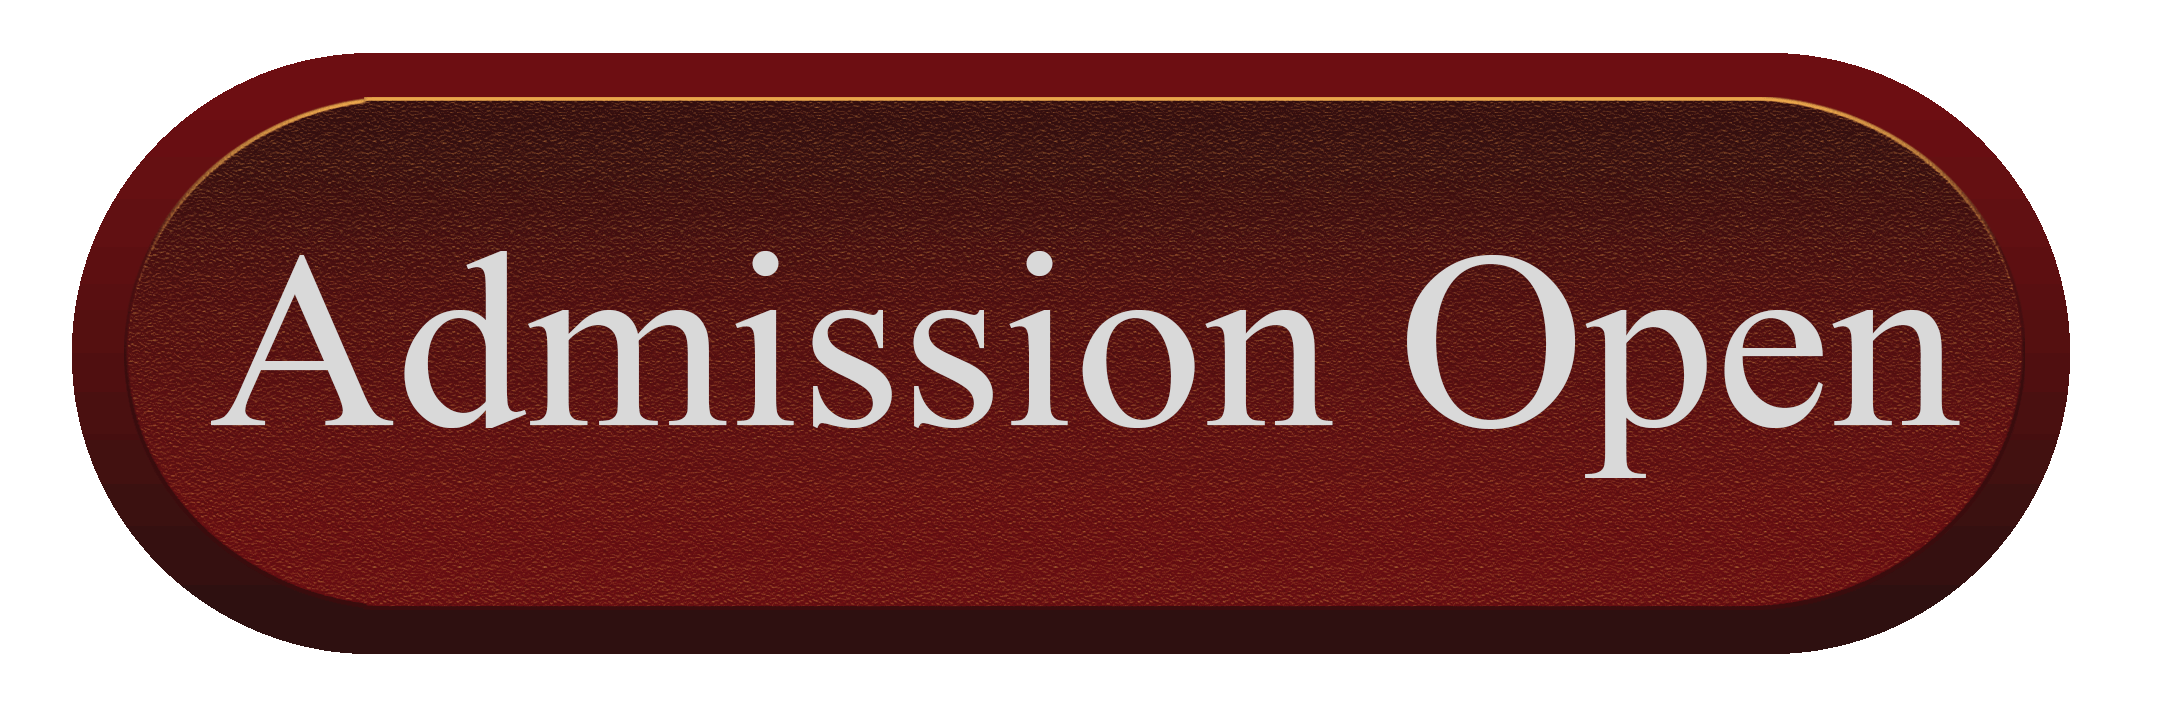 addmission open